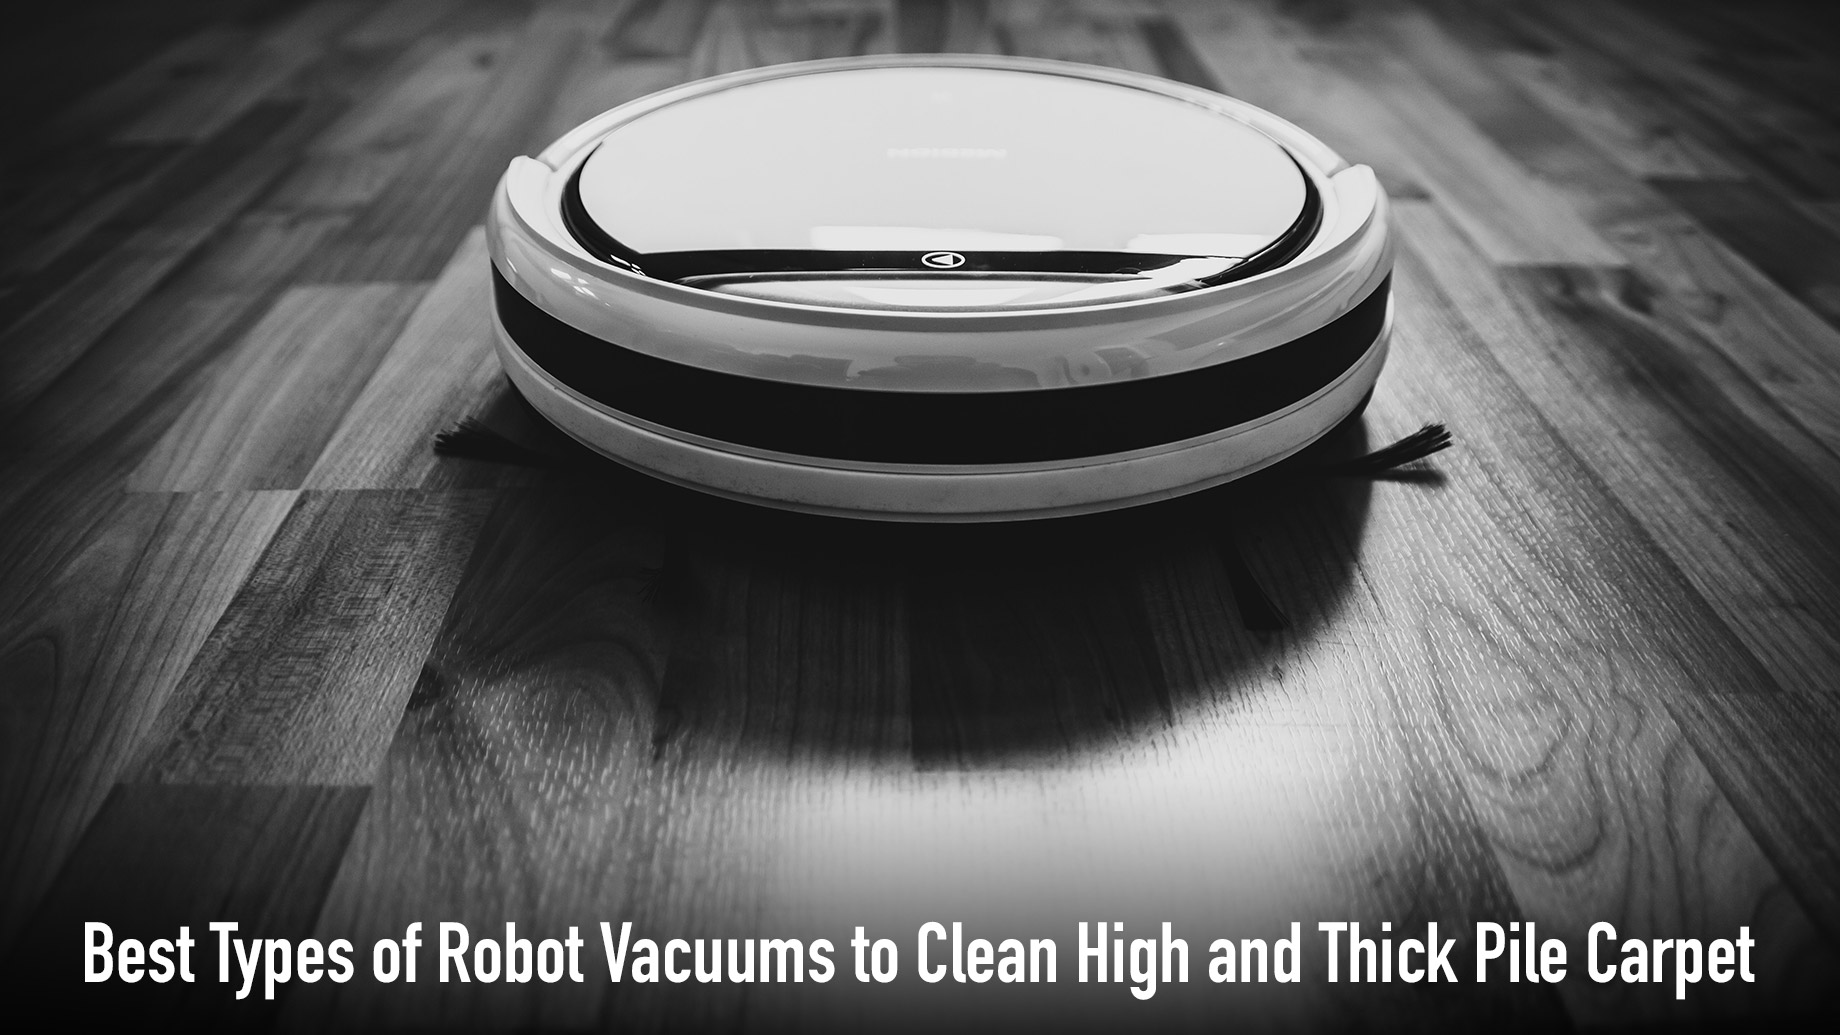 Best Types of Robot Vacuums to Clean High and Thick Pile Carpet